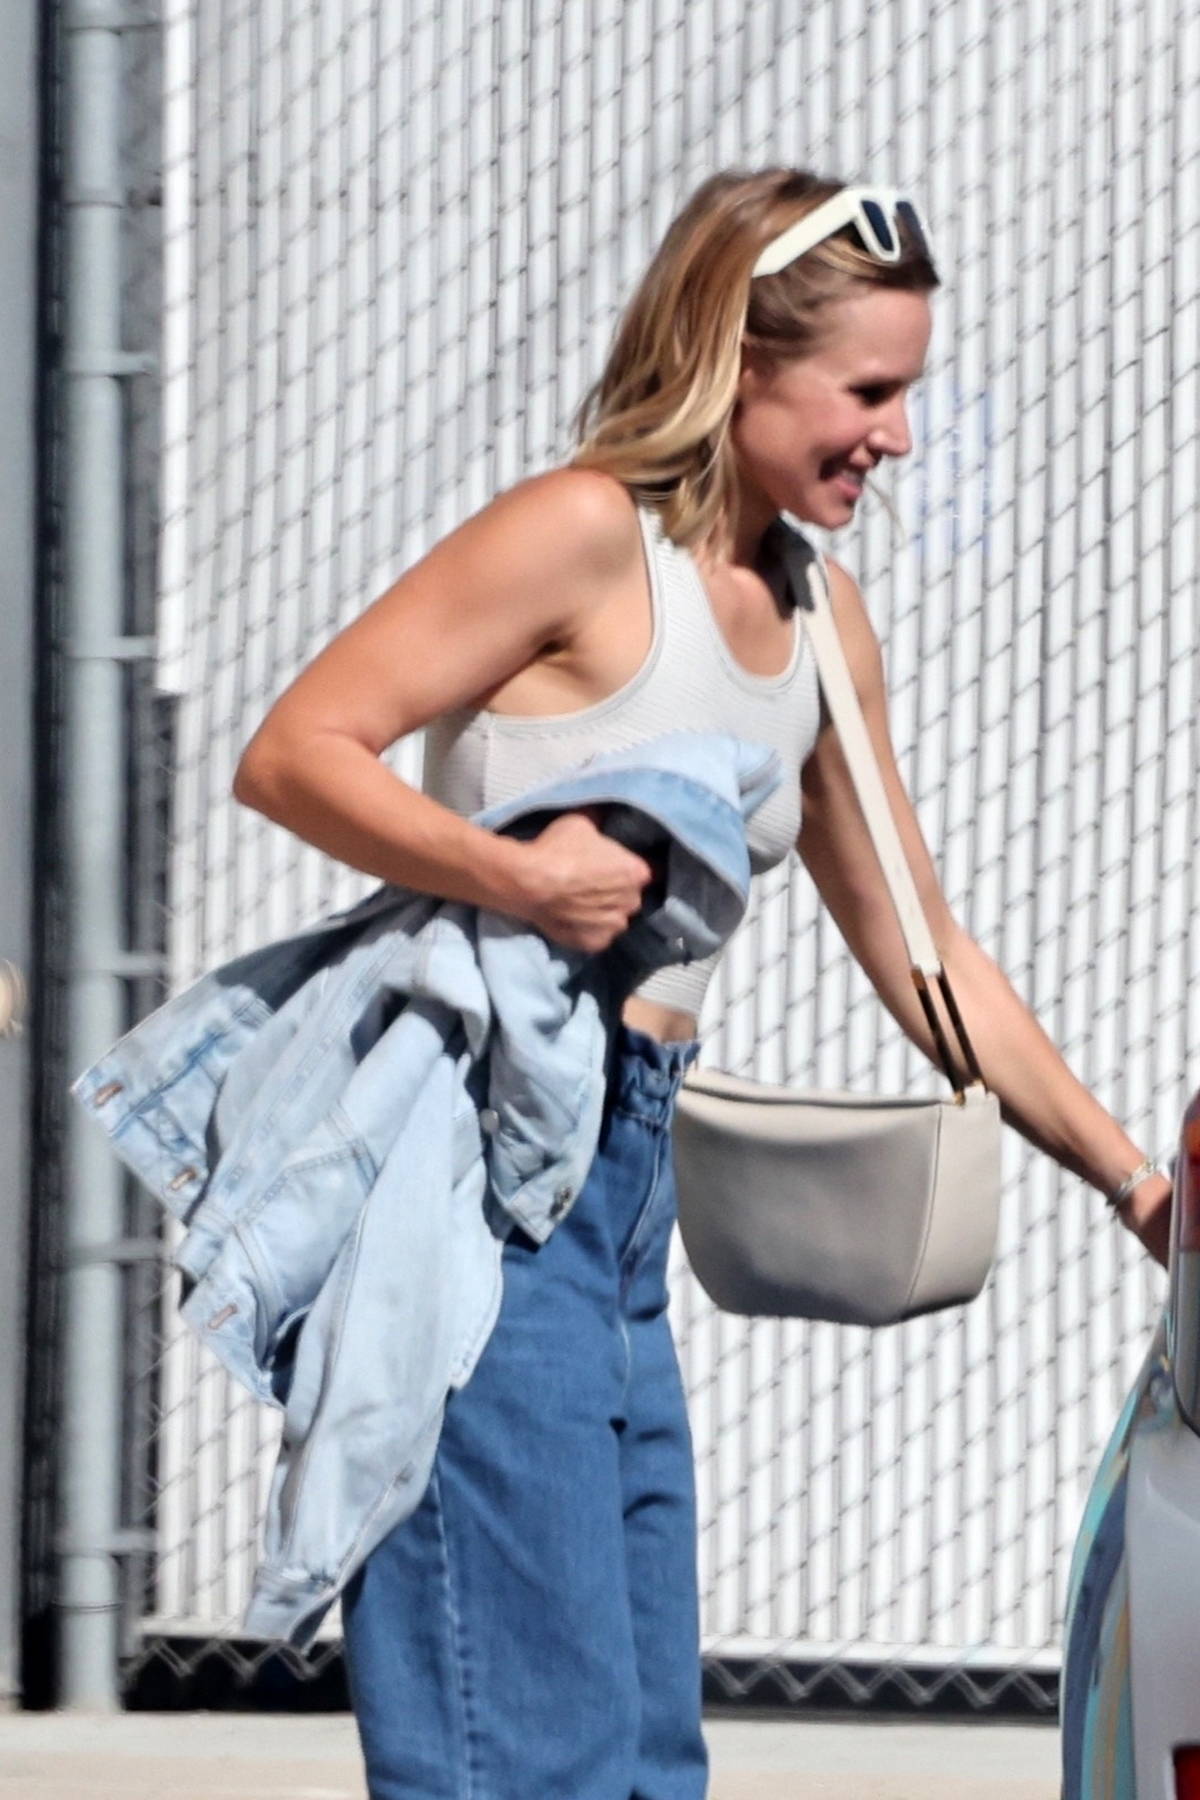 Kristen Bell wears a grey tank top and jeans while out running errands in  Los Angeles